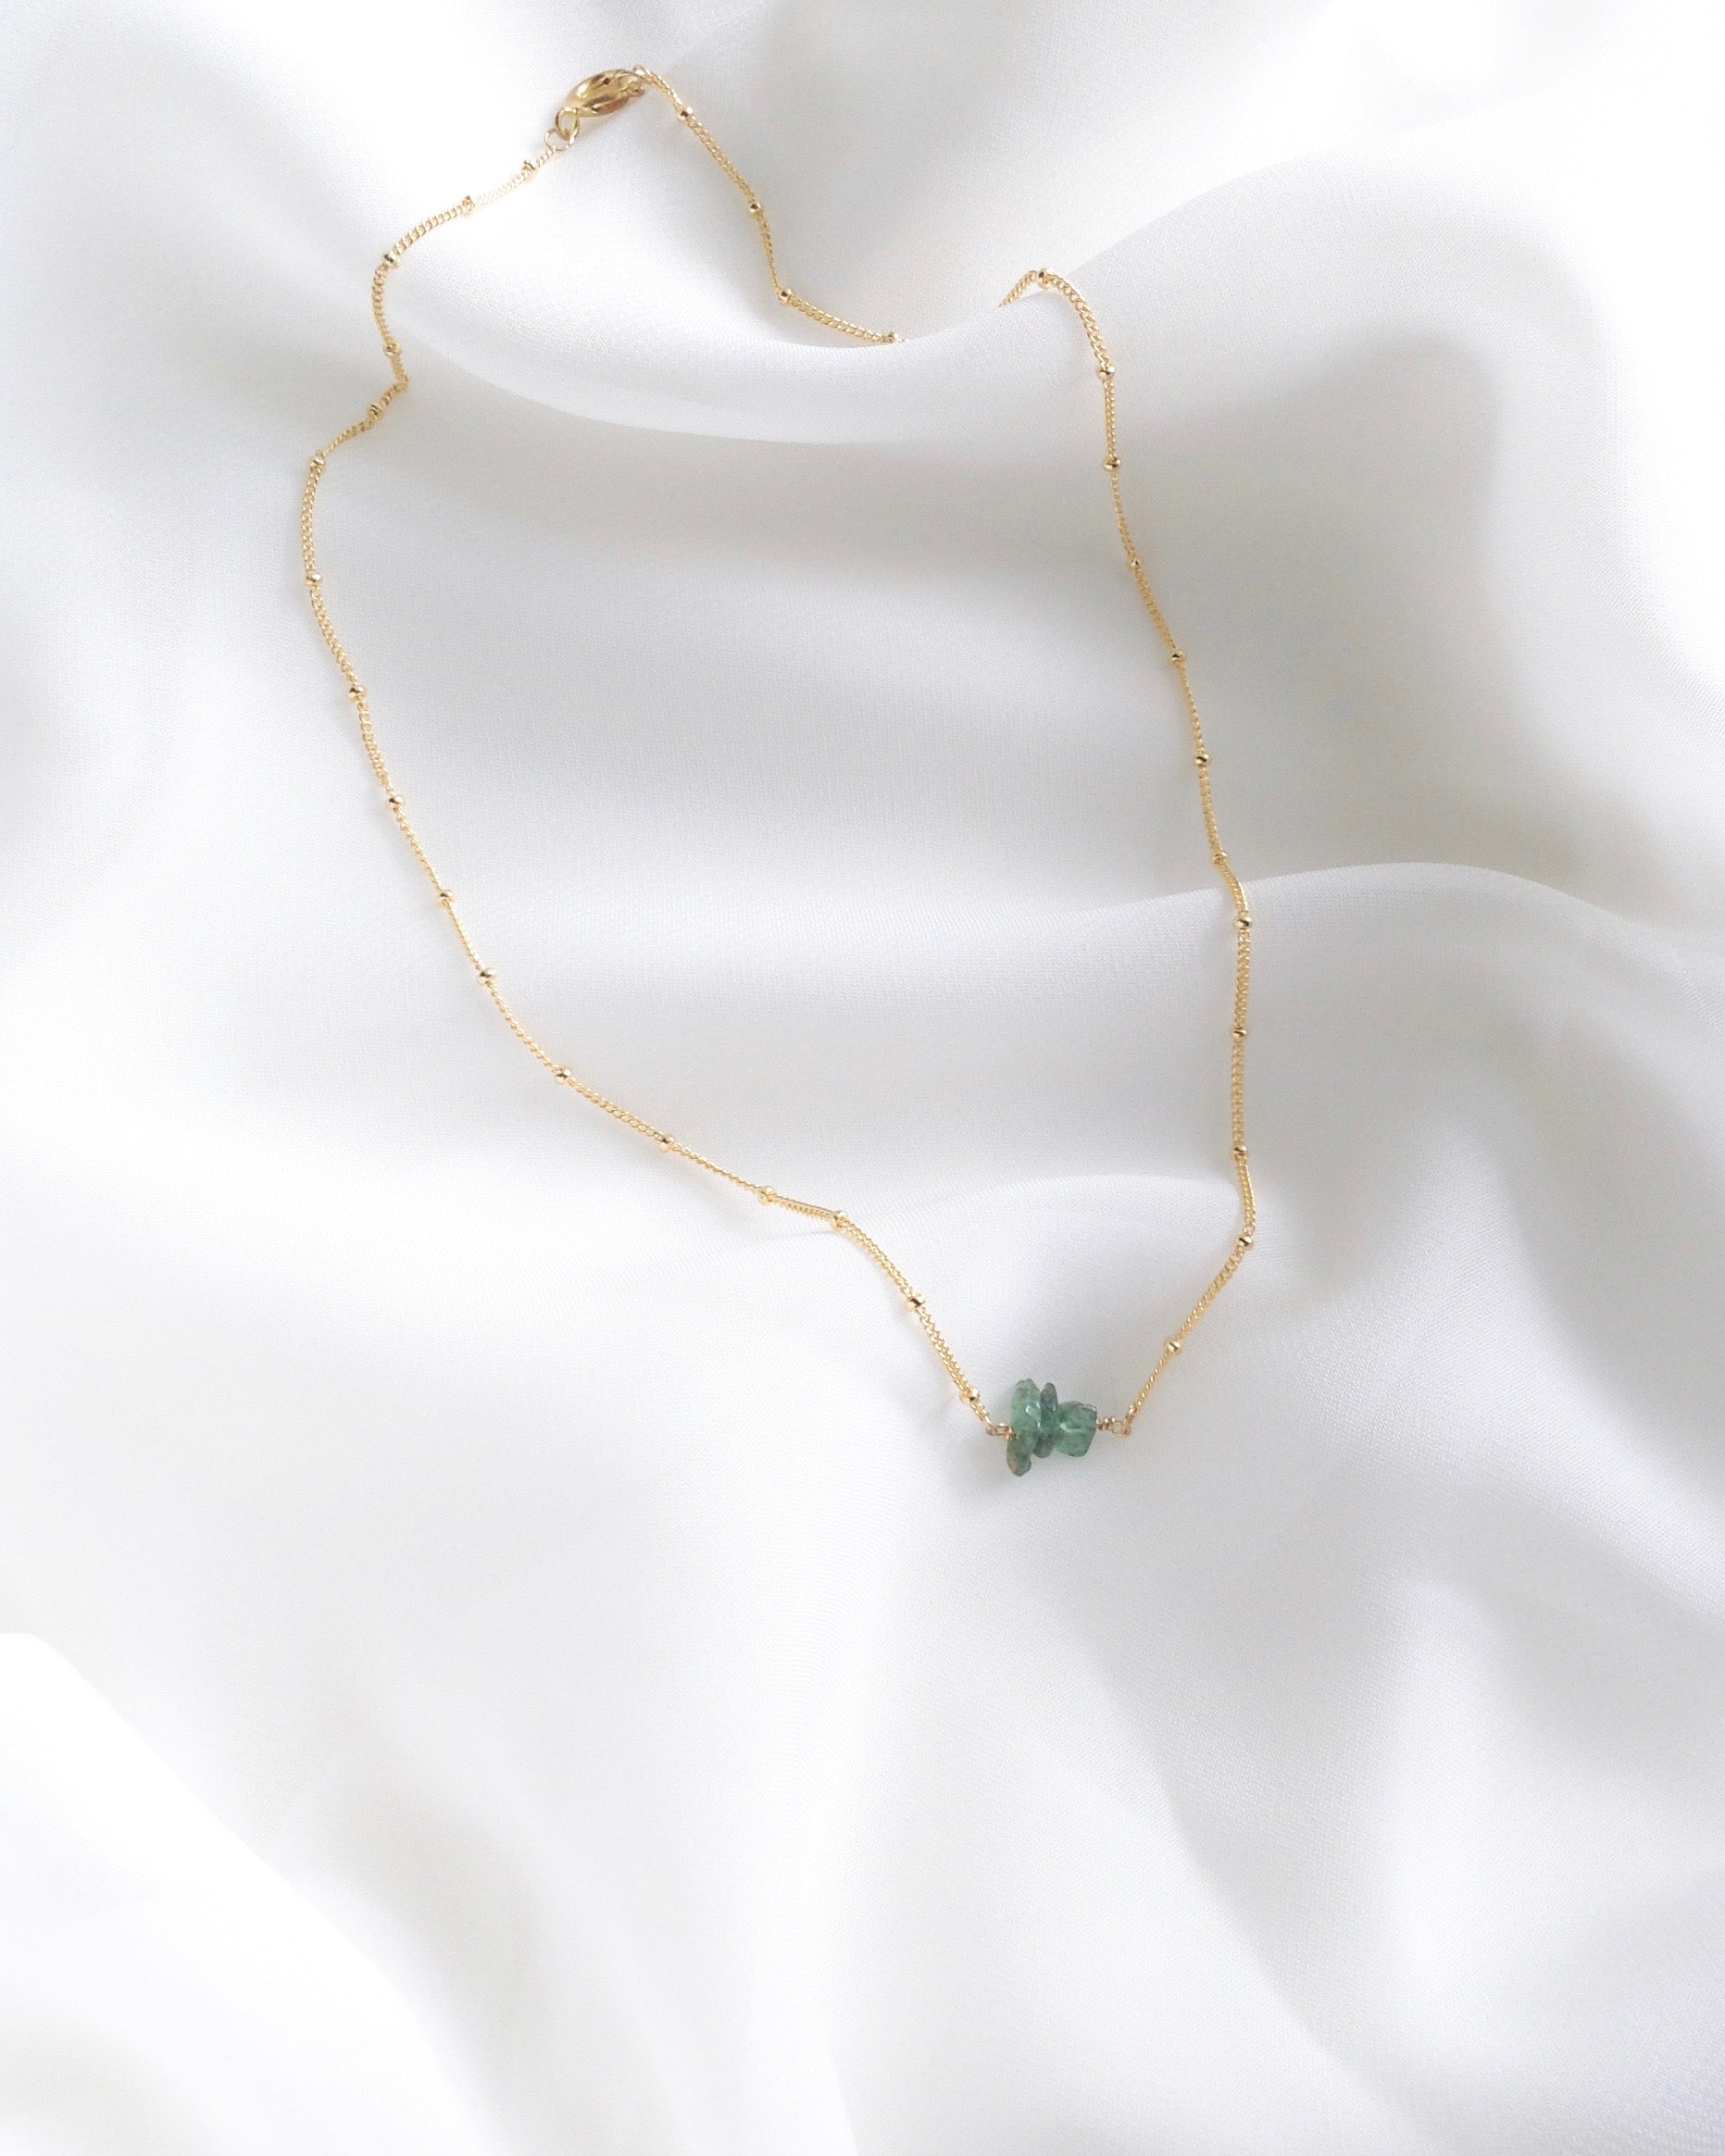 Genuine Emerald Raw Gemstone Necklace in Gold Filled or Sterling Silver | IB Jewelry